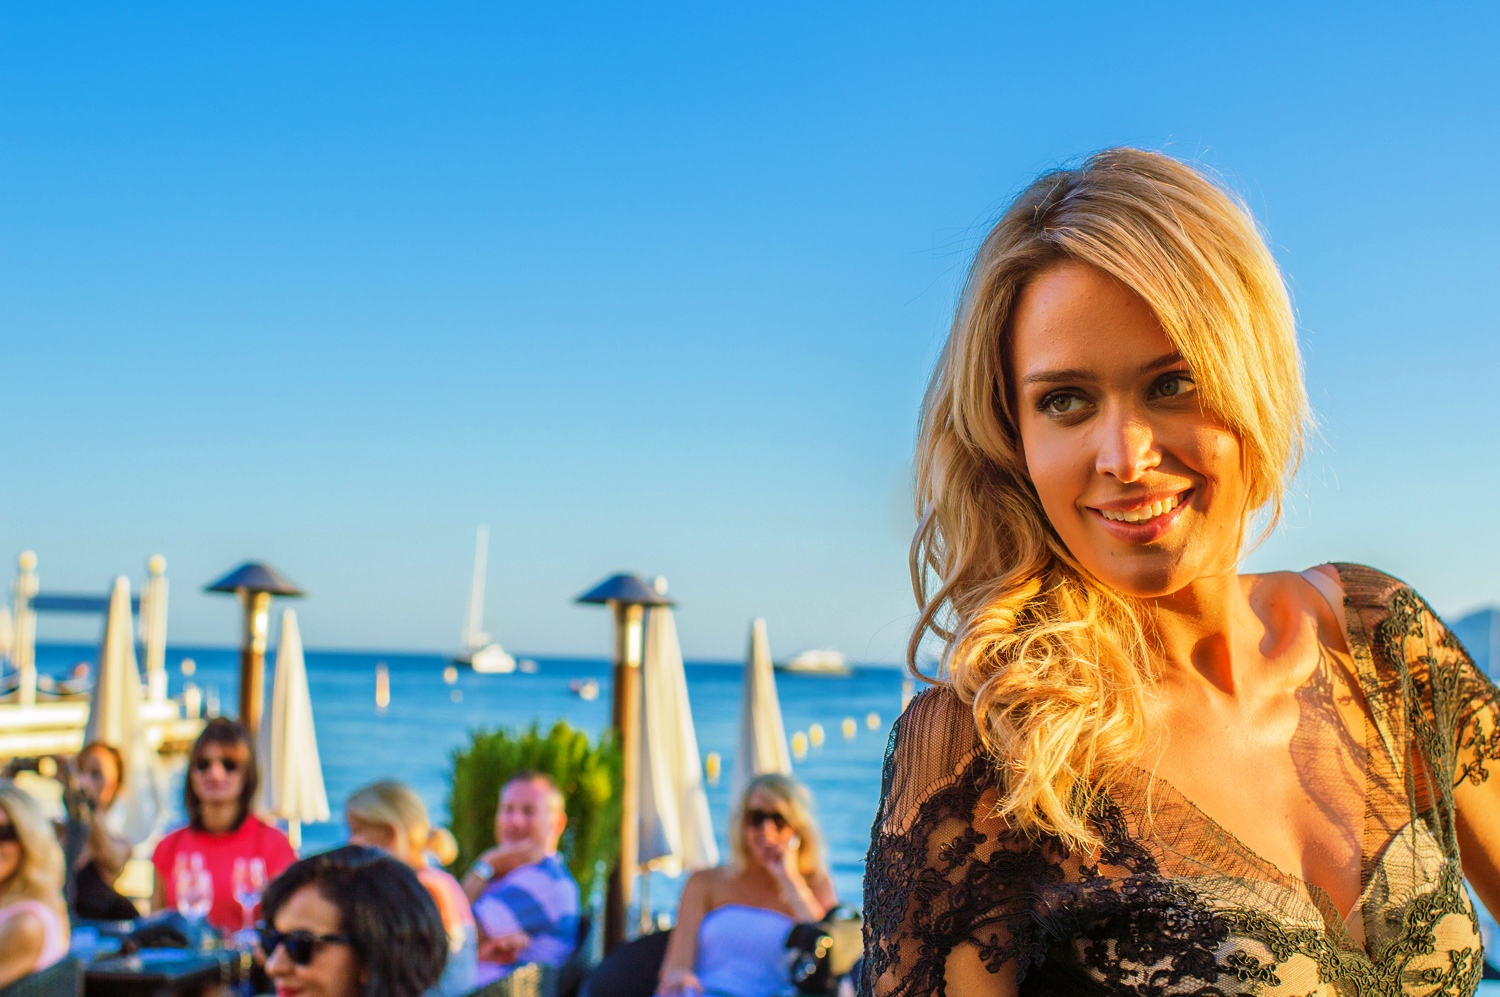 Cannes Film Festival - Monaco Best Business Networking Luxury Event Club